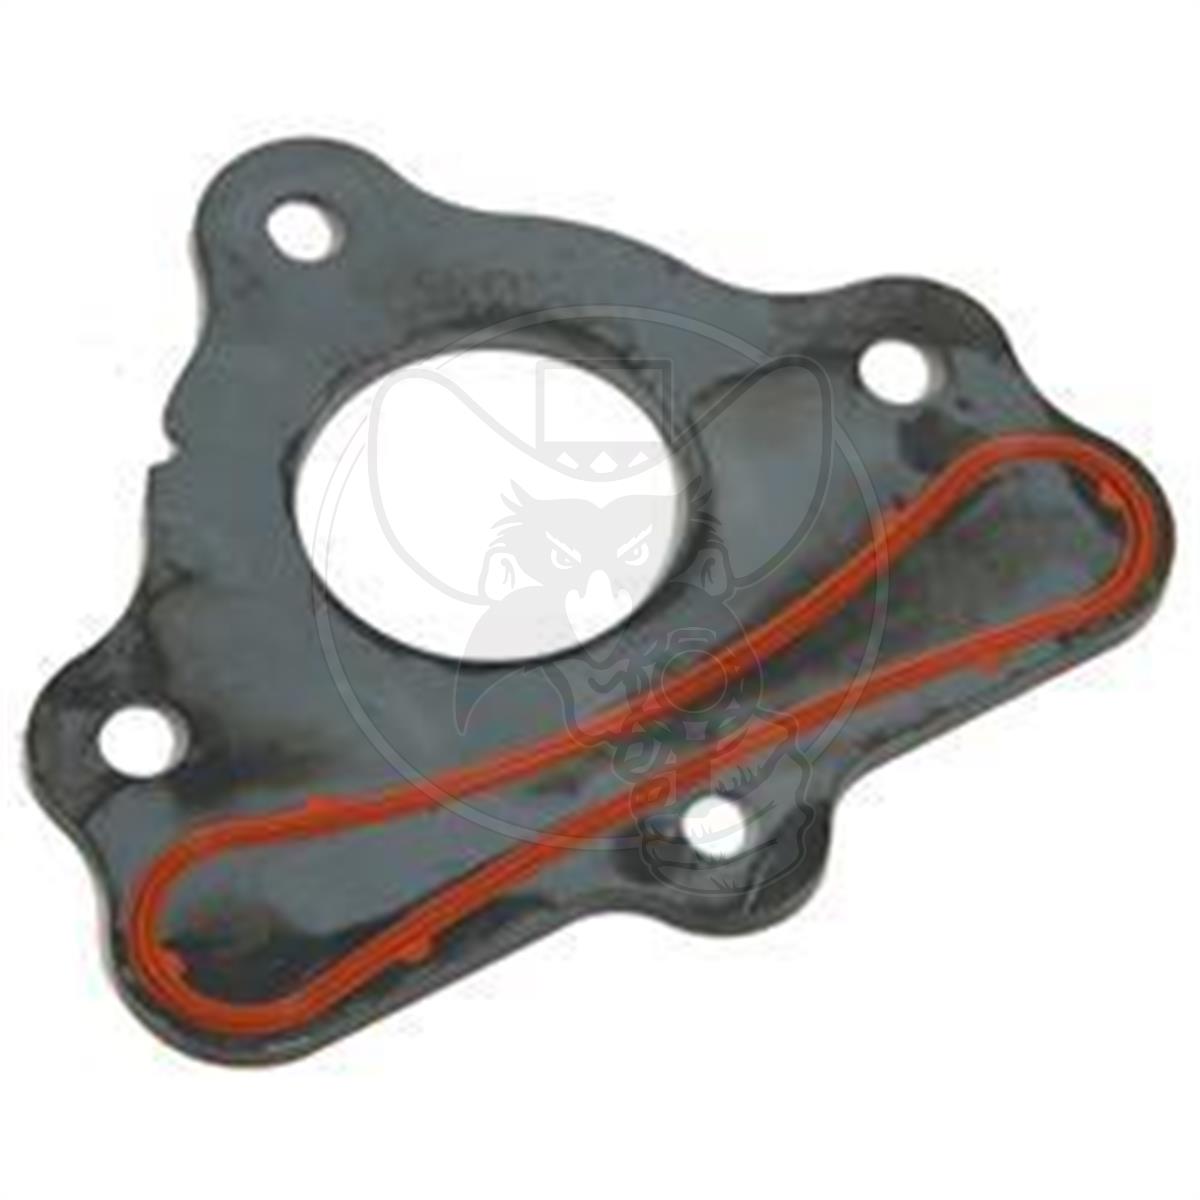 GM PERFORMANCE CAMSHAFT THRUST PLATE RETAINER SOLID STEEL FITS GM